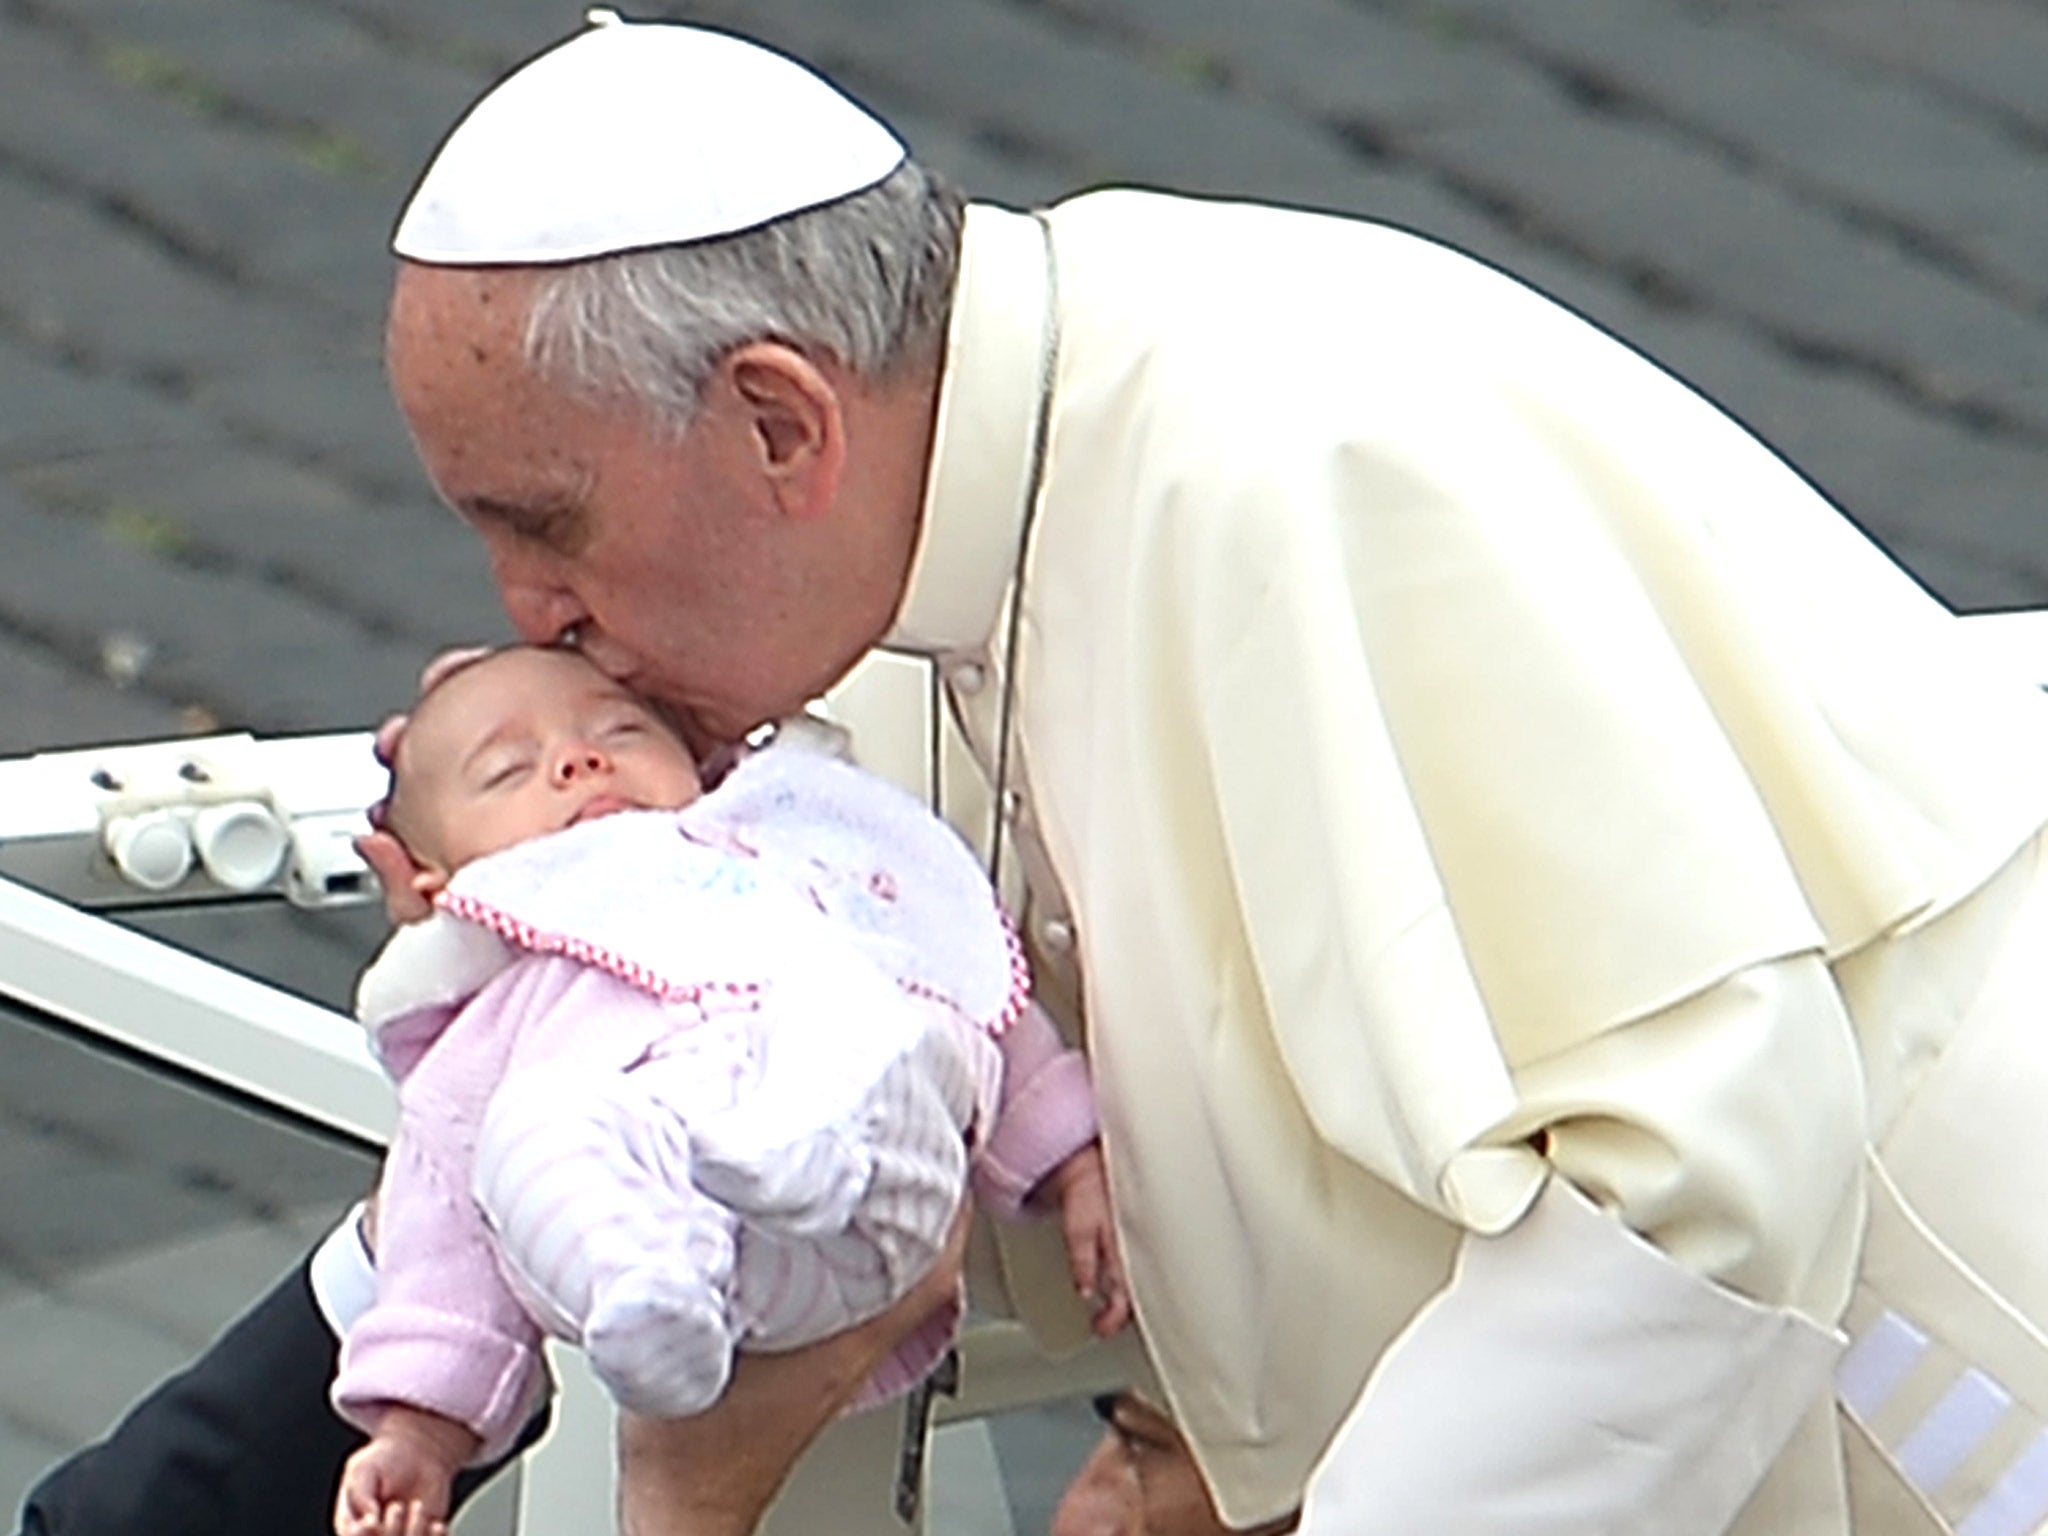 The Pope has given his support to breastfeeding in public